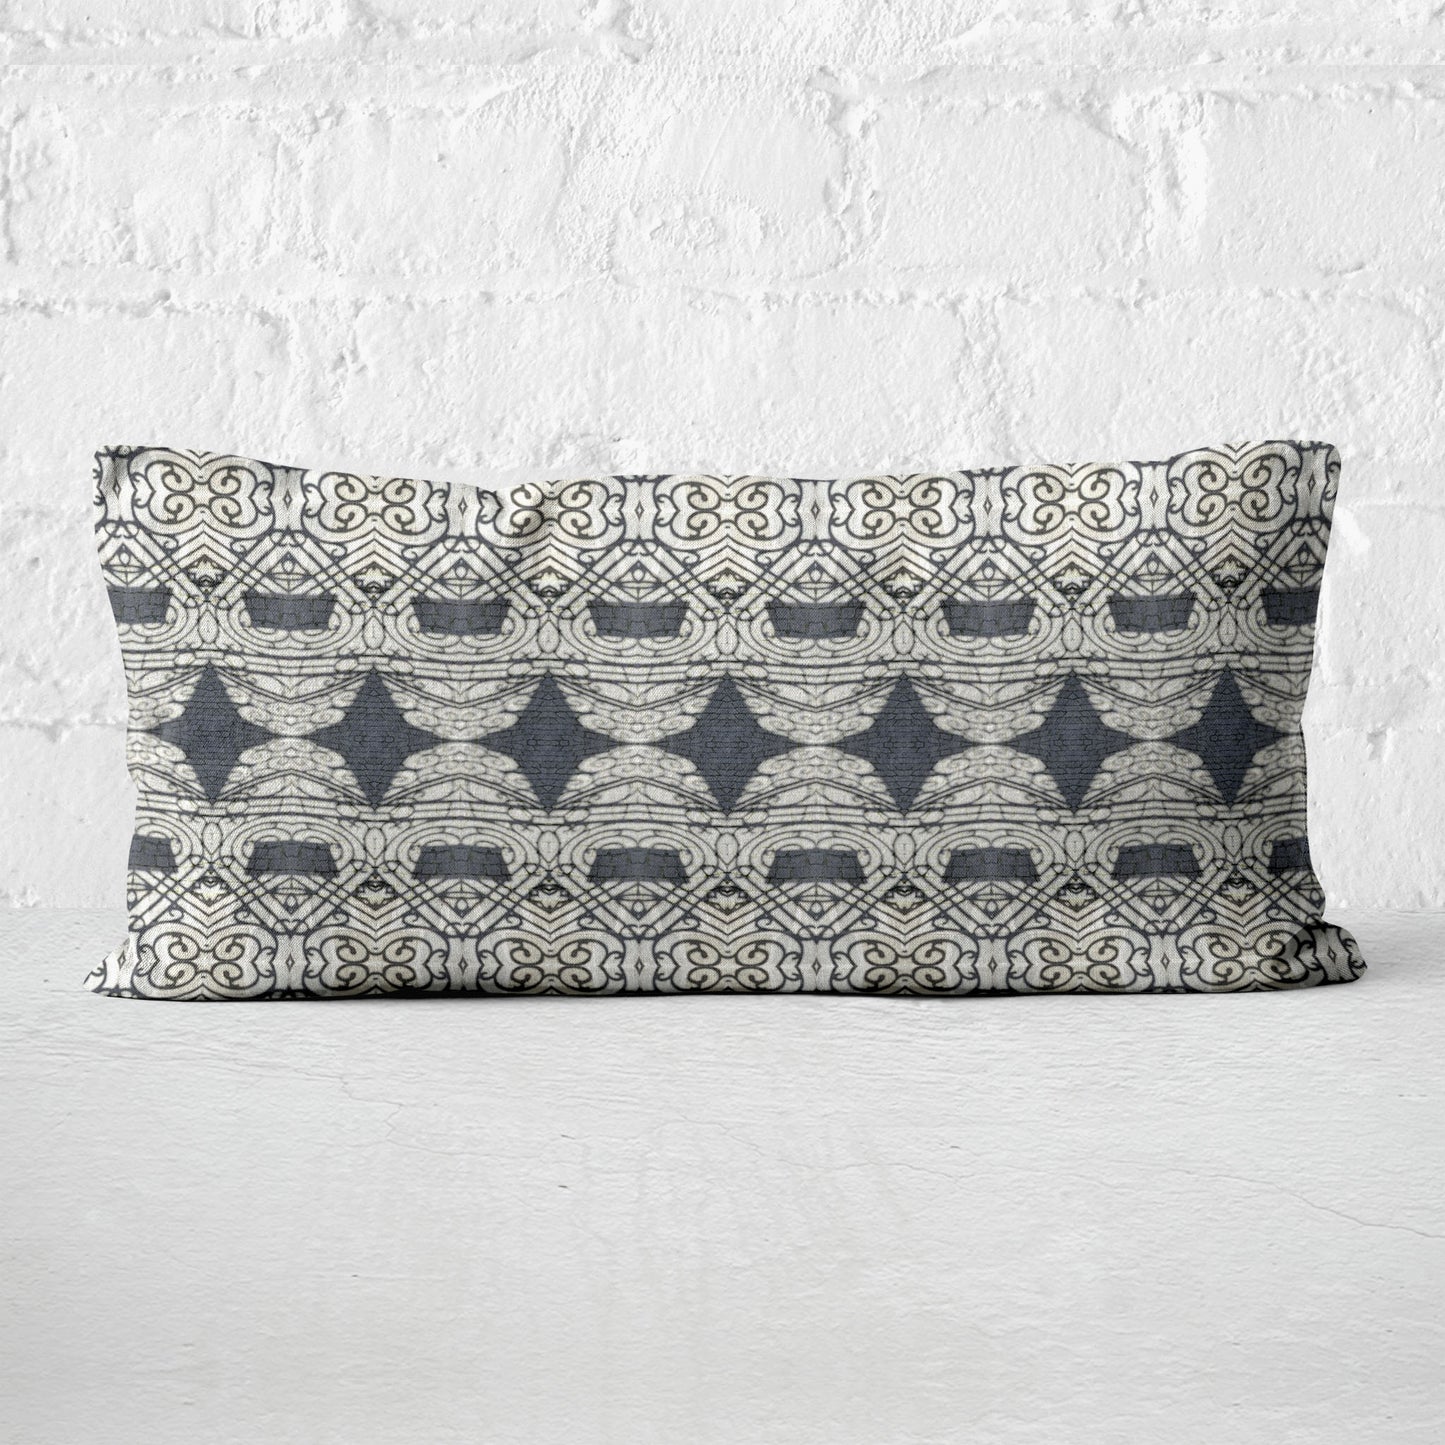 Rectangular lumbar pillow featuring abstract ornate pattern in black and grey tones leaning against white brick wall.